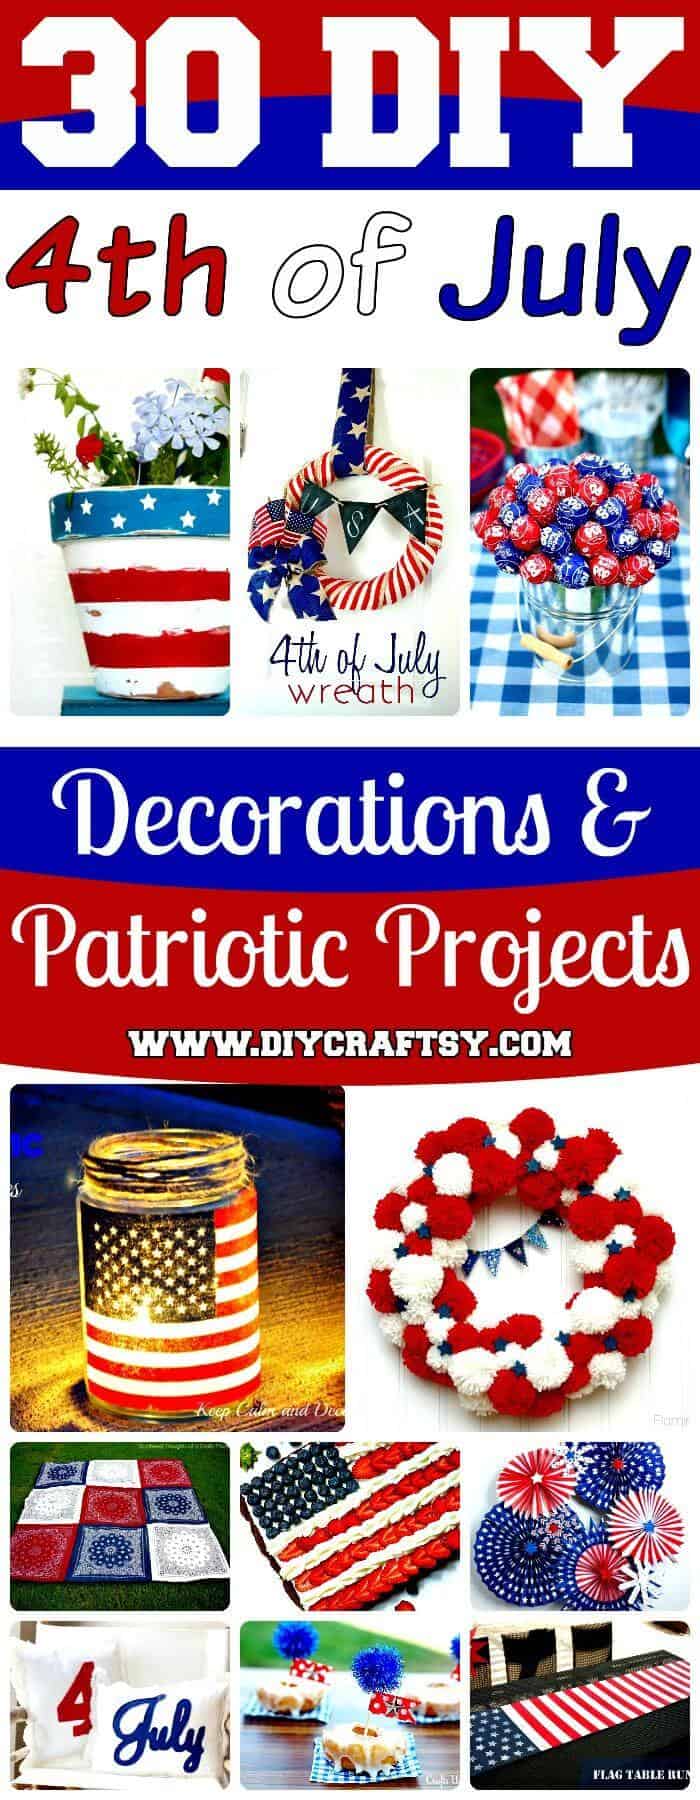 30-DIY-4th-of-July-Decorations-Patriotic-DIY-Fourth-of-July-Decor-Projects